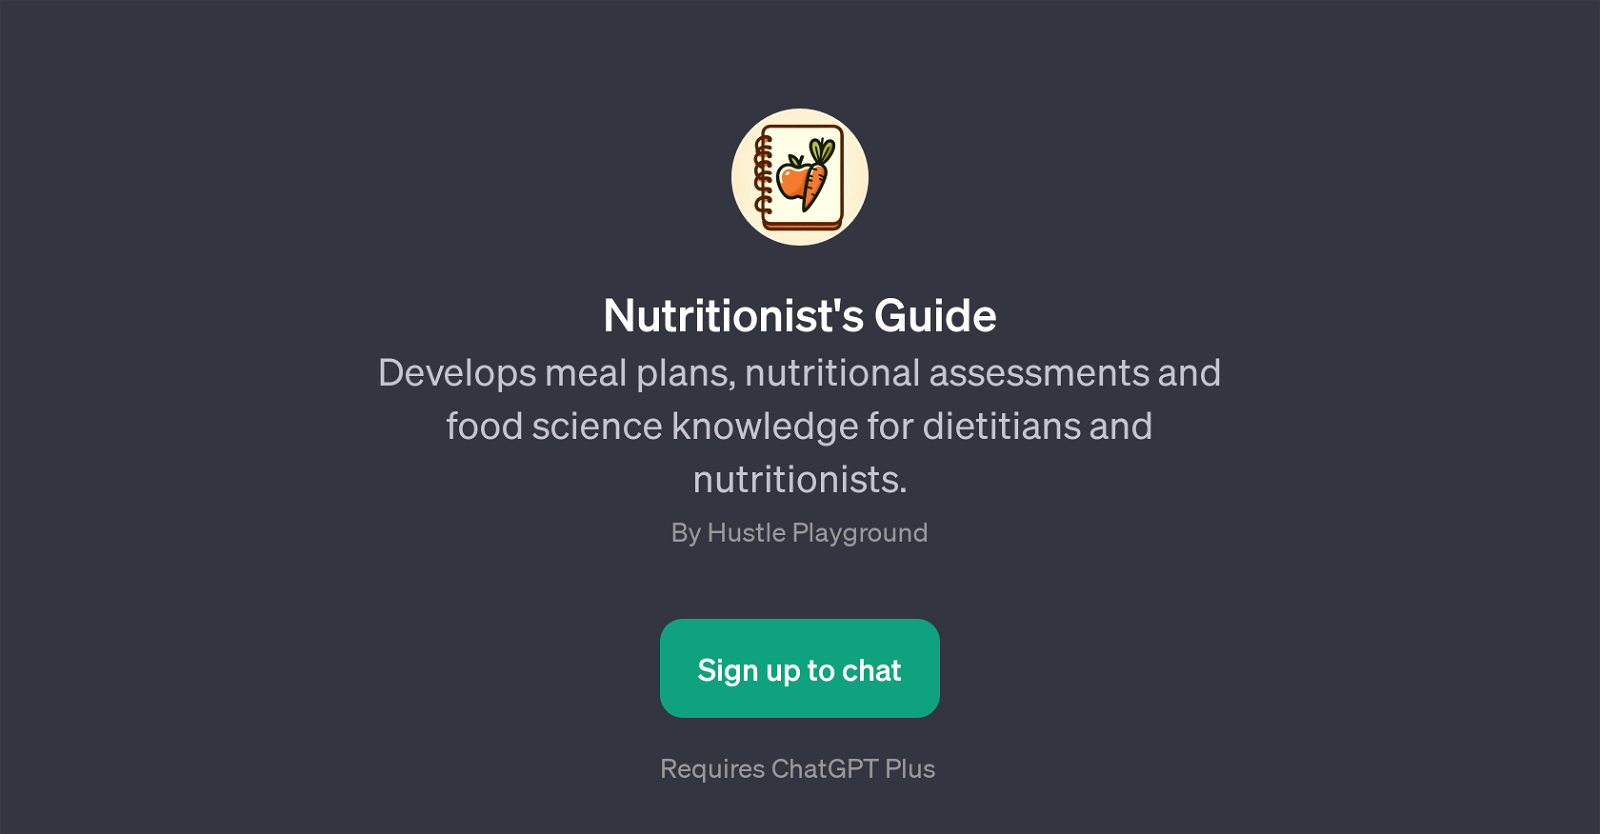 Nutritionist's Guide website